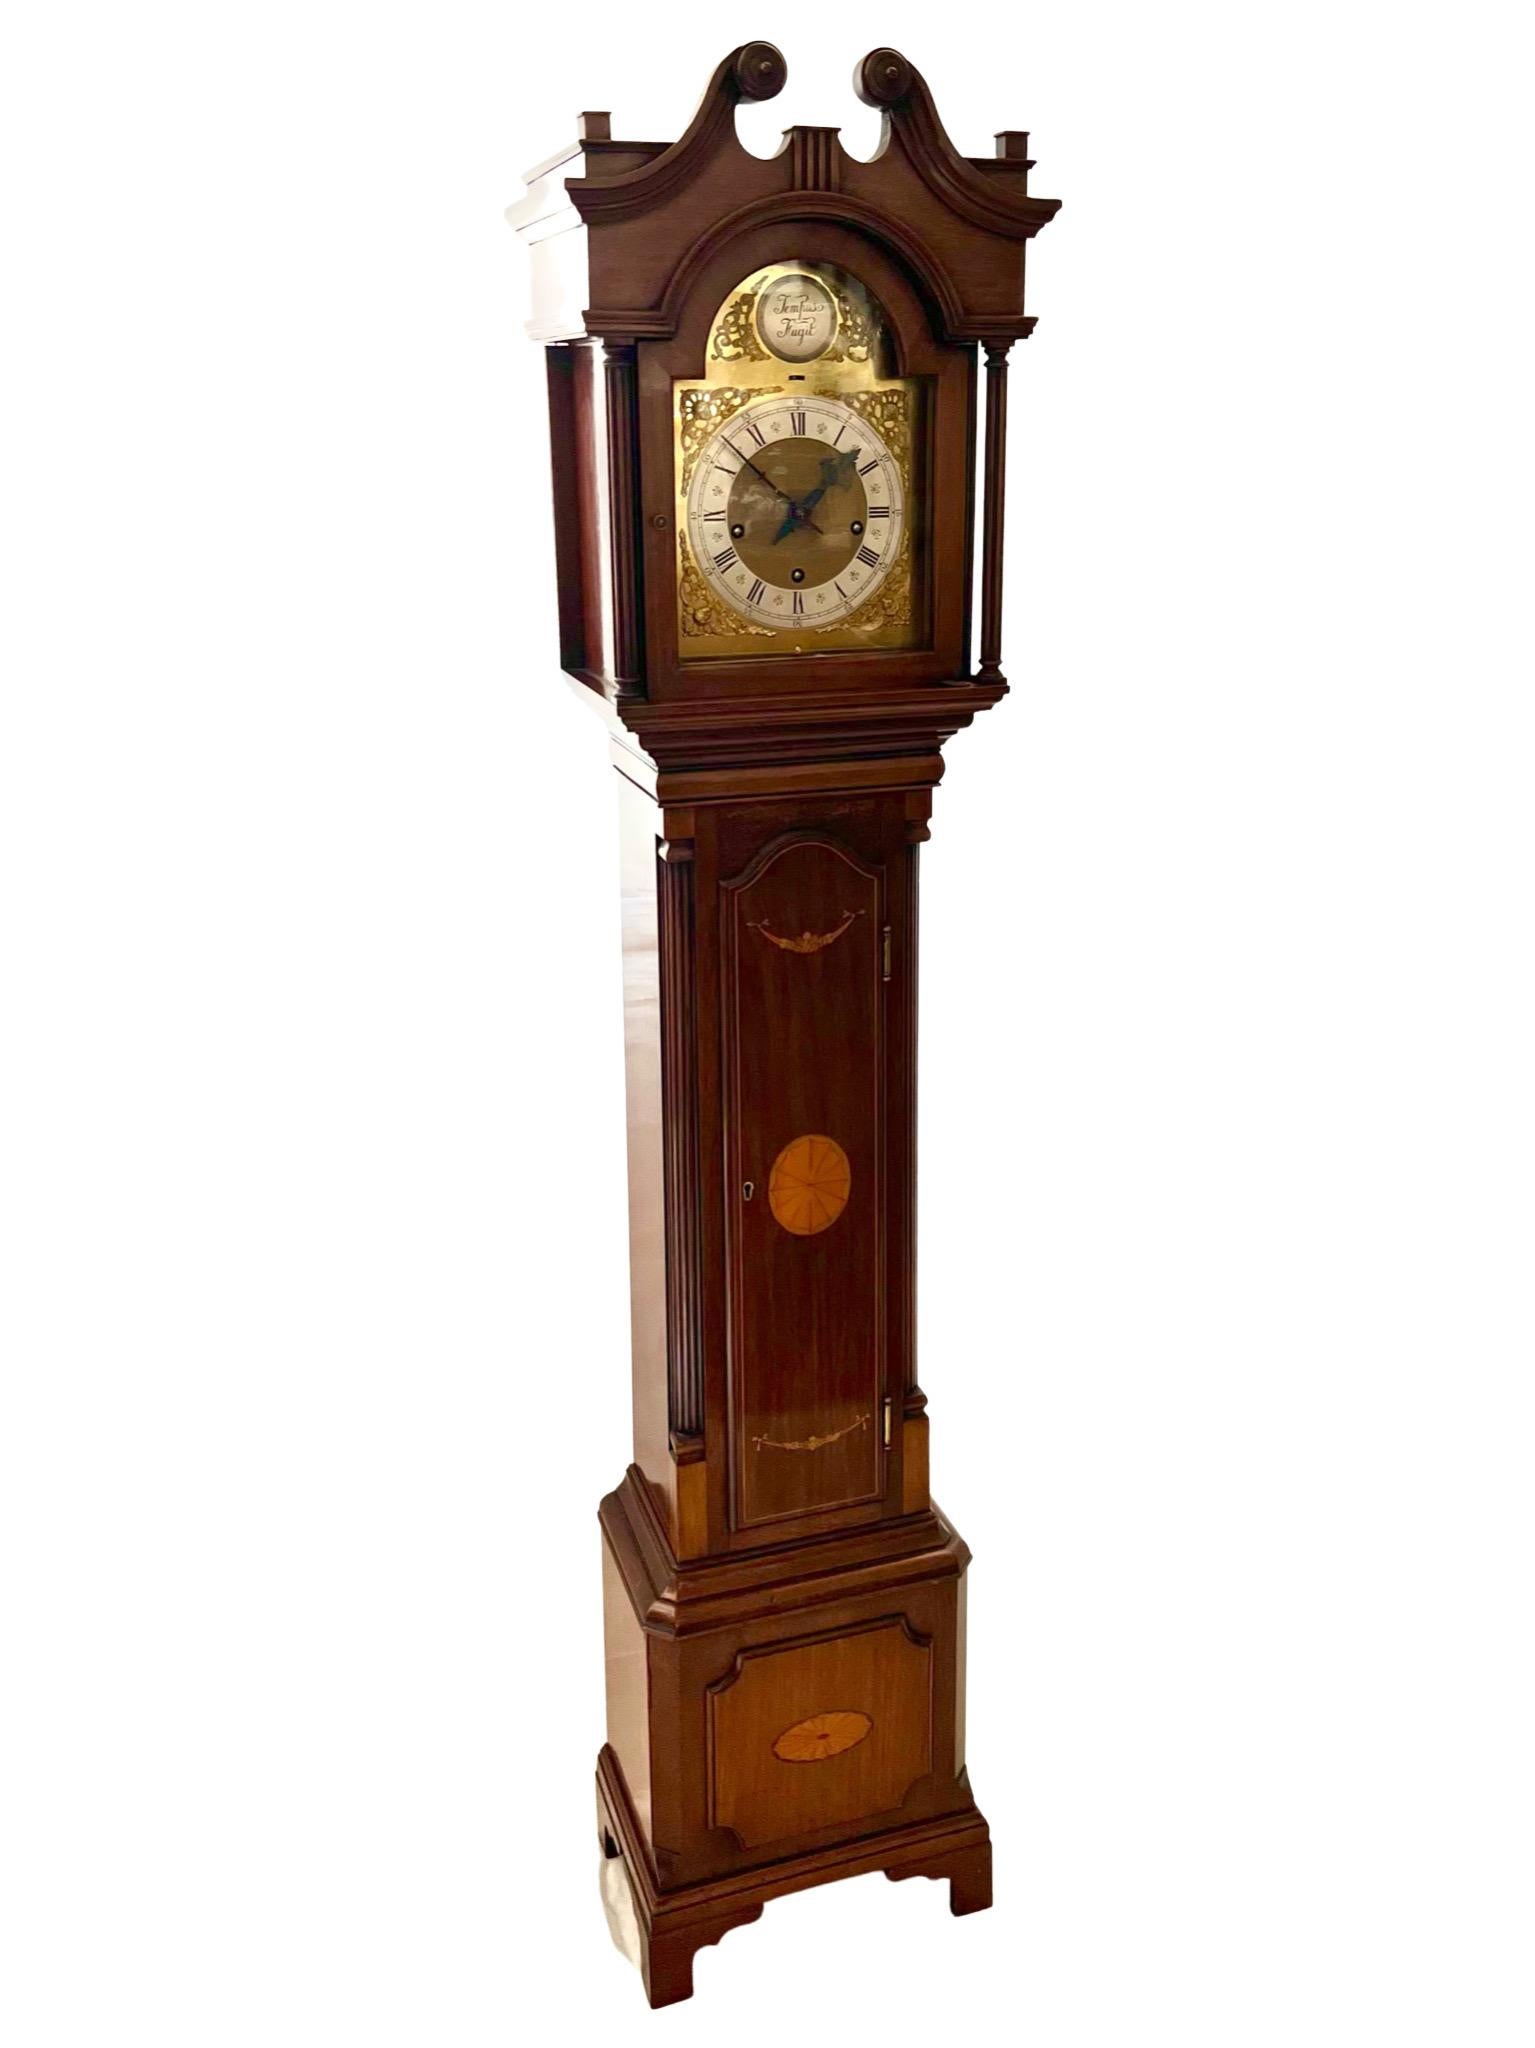 A handsome Edwardian Chippendale style mahogany eight day quarter chiming miniature longcase clock.

The solid mahogany case is a deep rich colour and has a beautiful swan neck pediment with delicate boxwood inlay decorations, in keeping with the